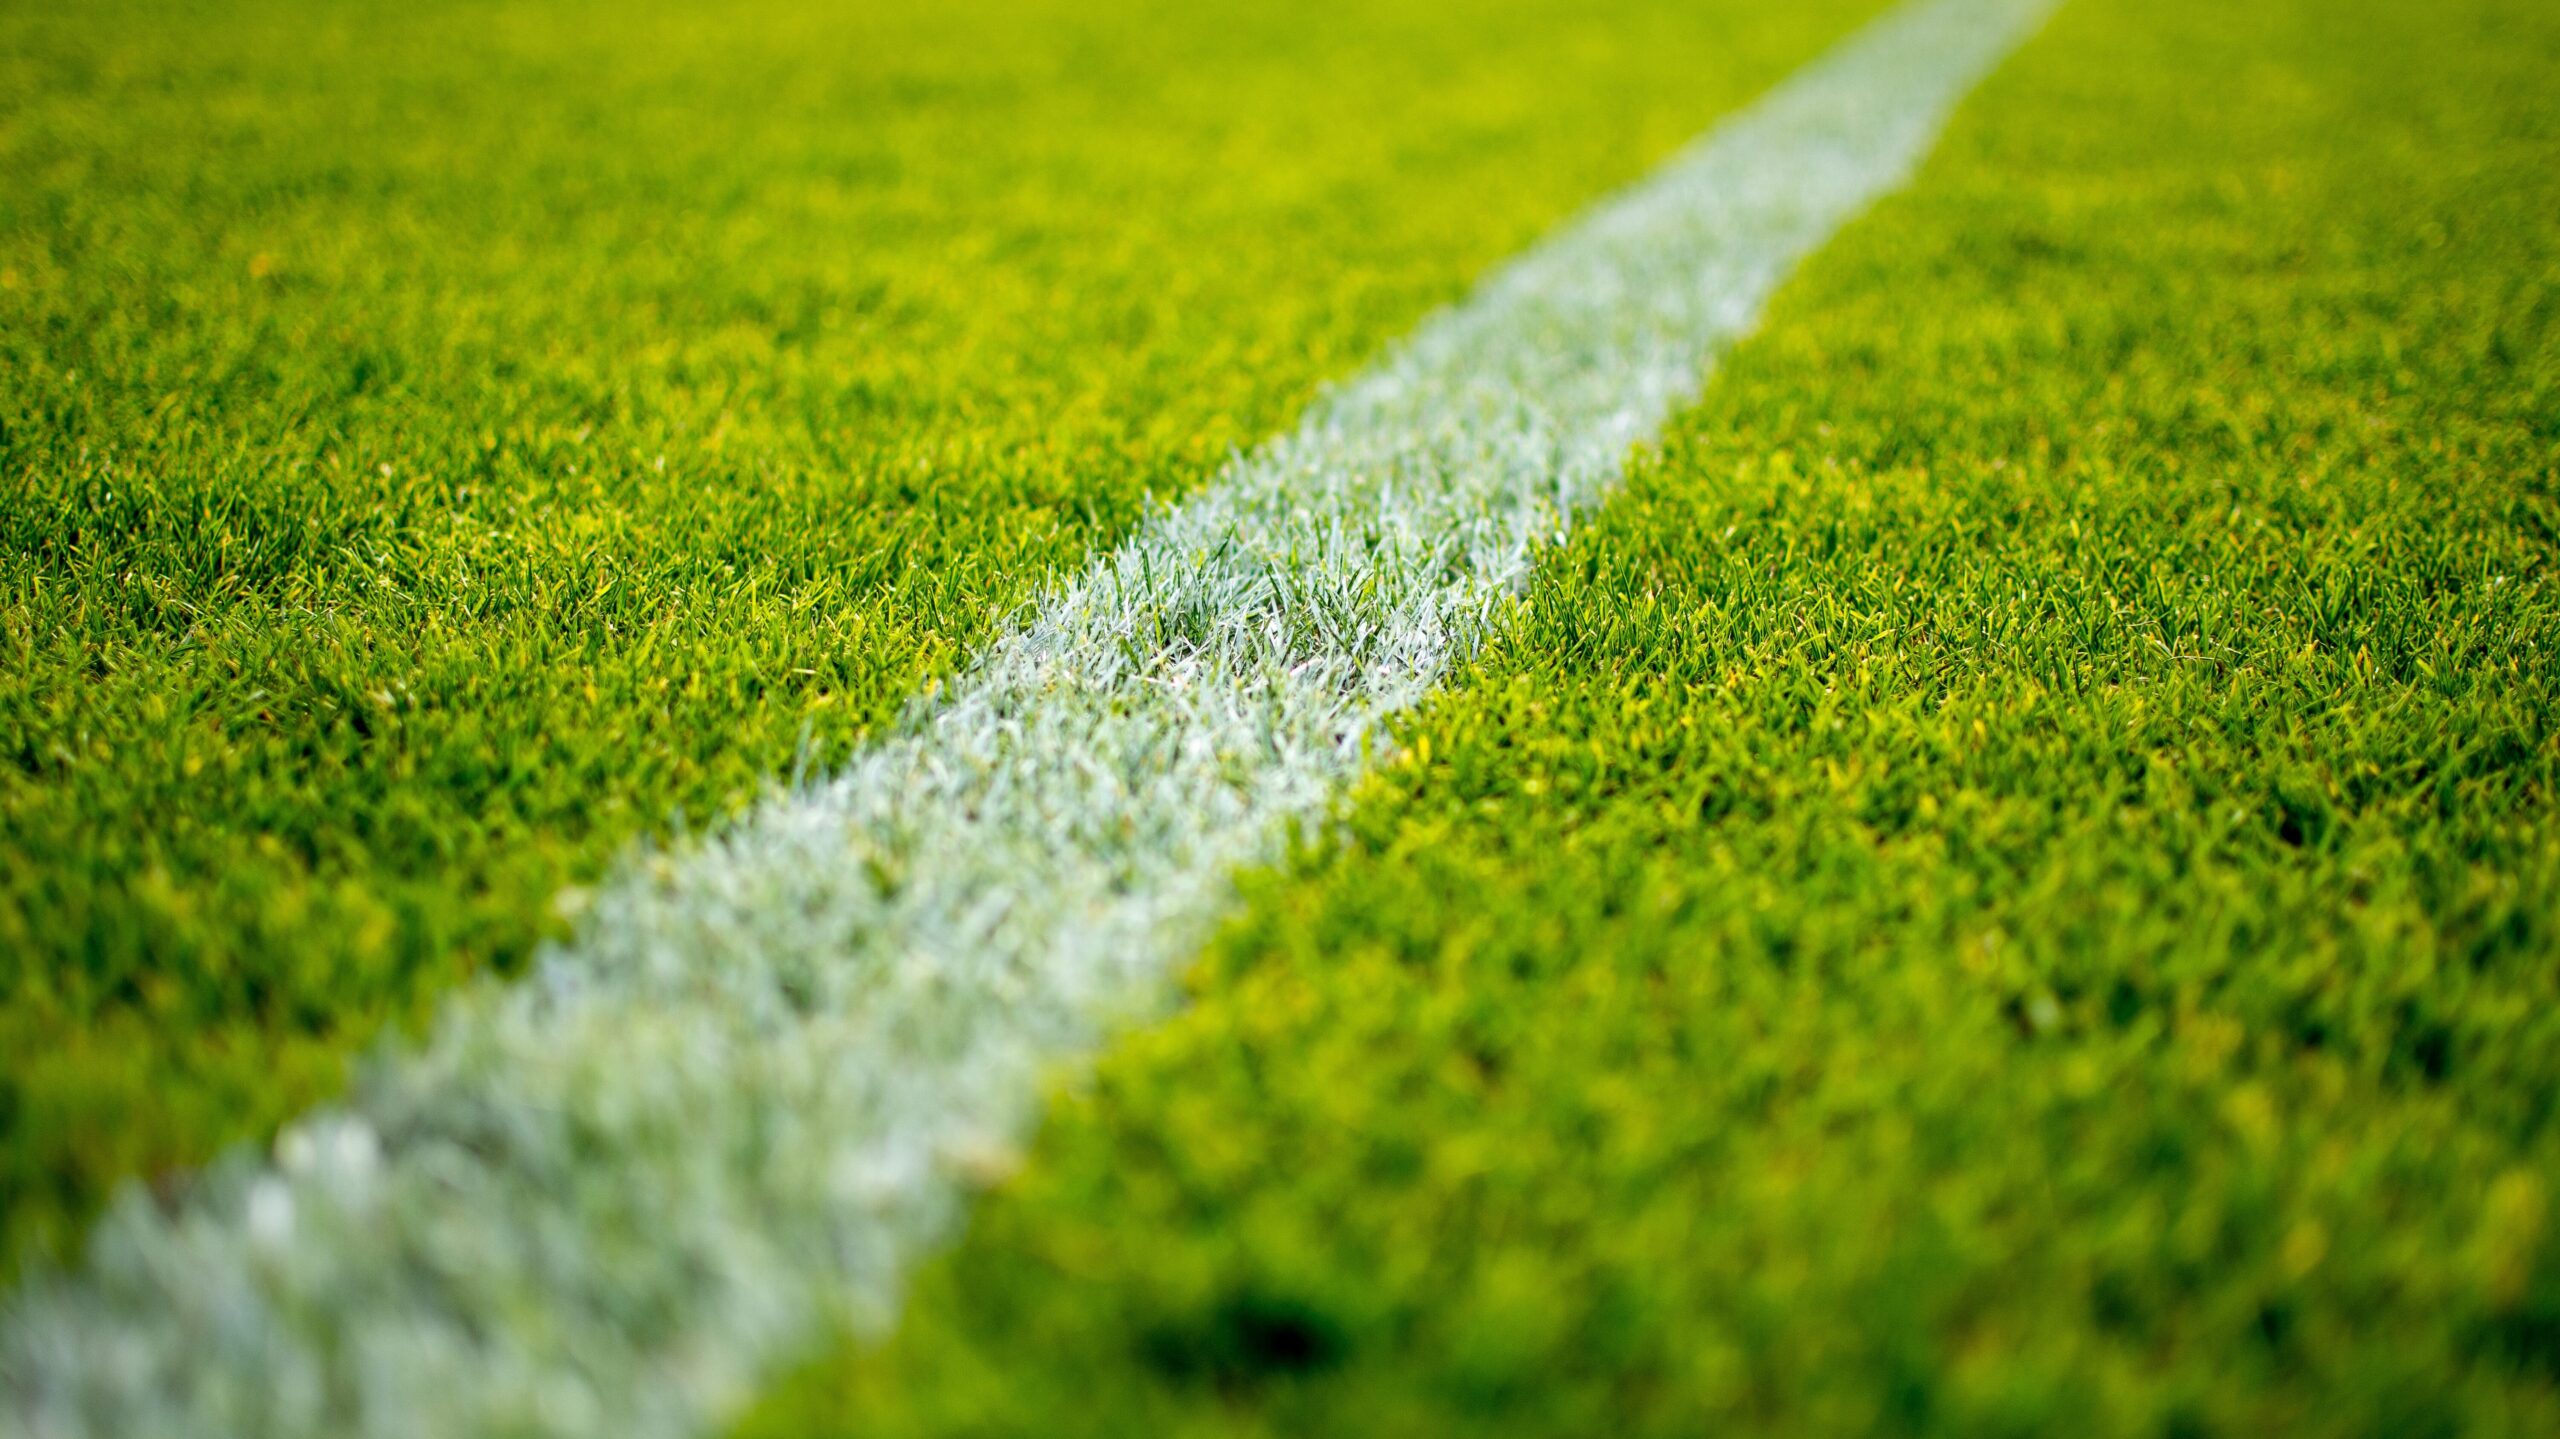 Close-up shot of a line on a sports field